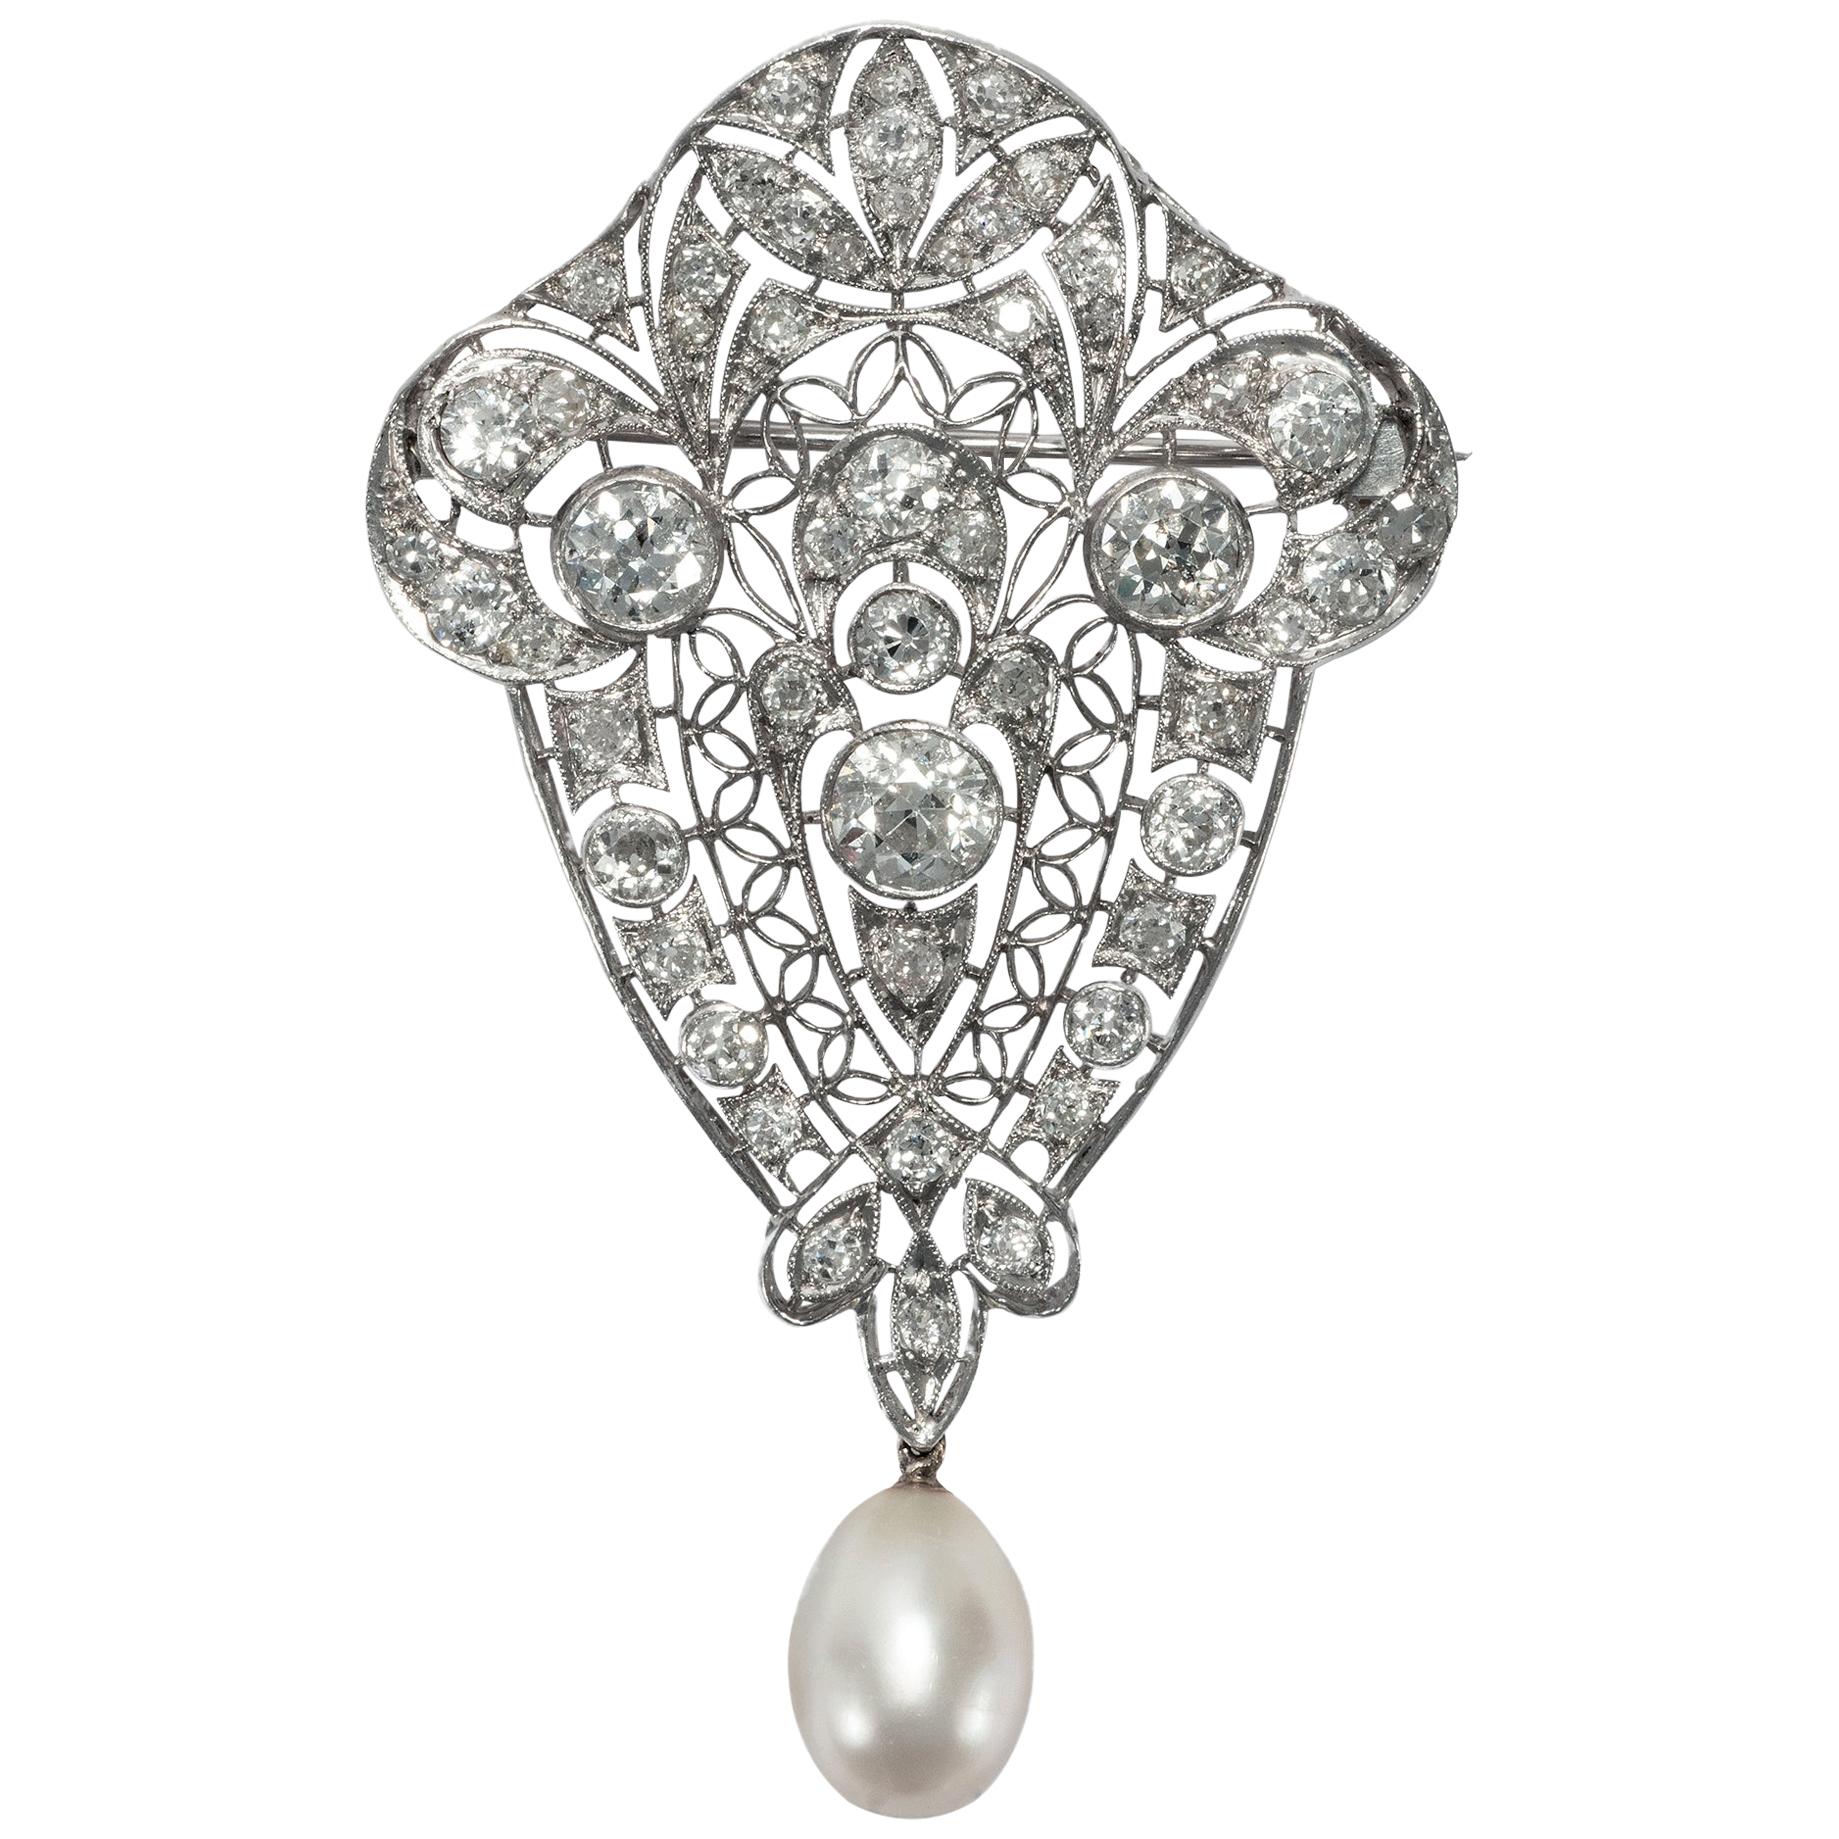 Antique Edwardian circa 1910 Certified 3.55 Carat Diamond Natural Pearl Brooch For Sale